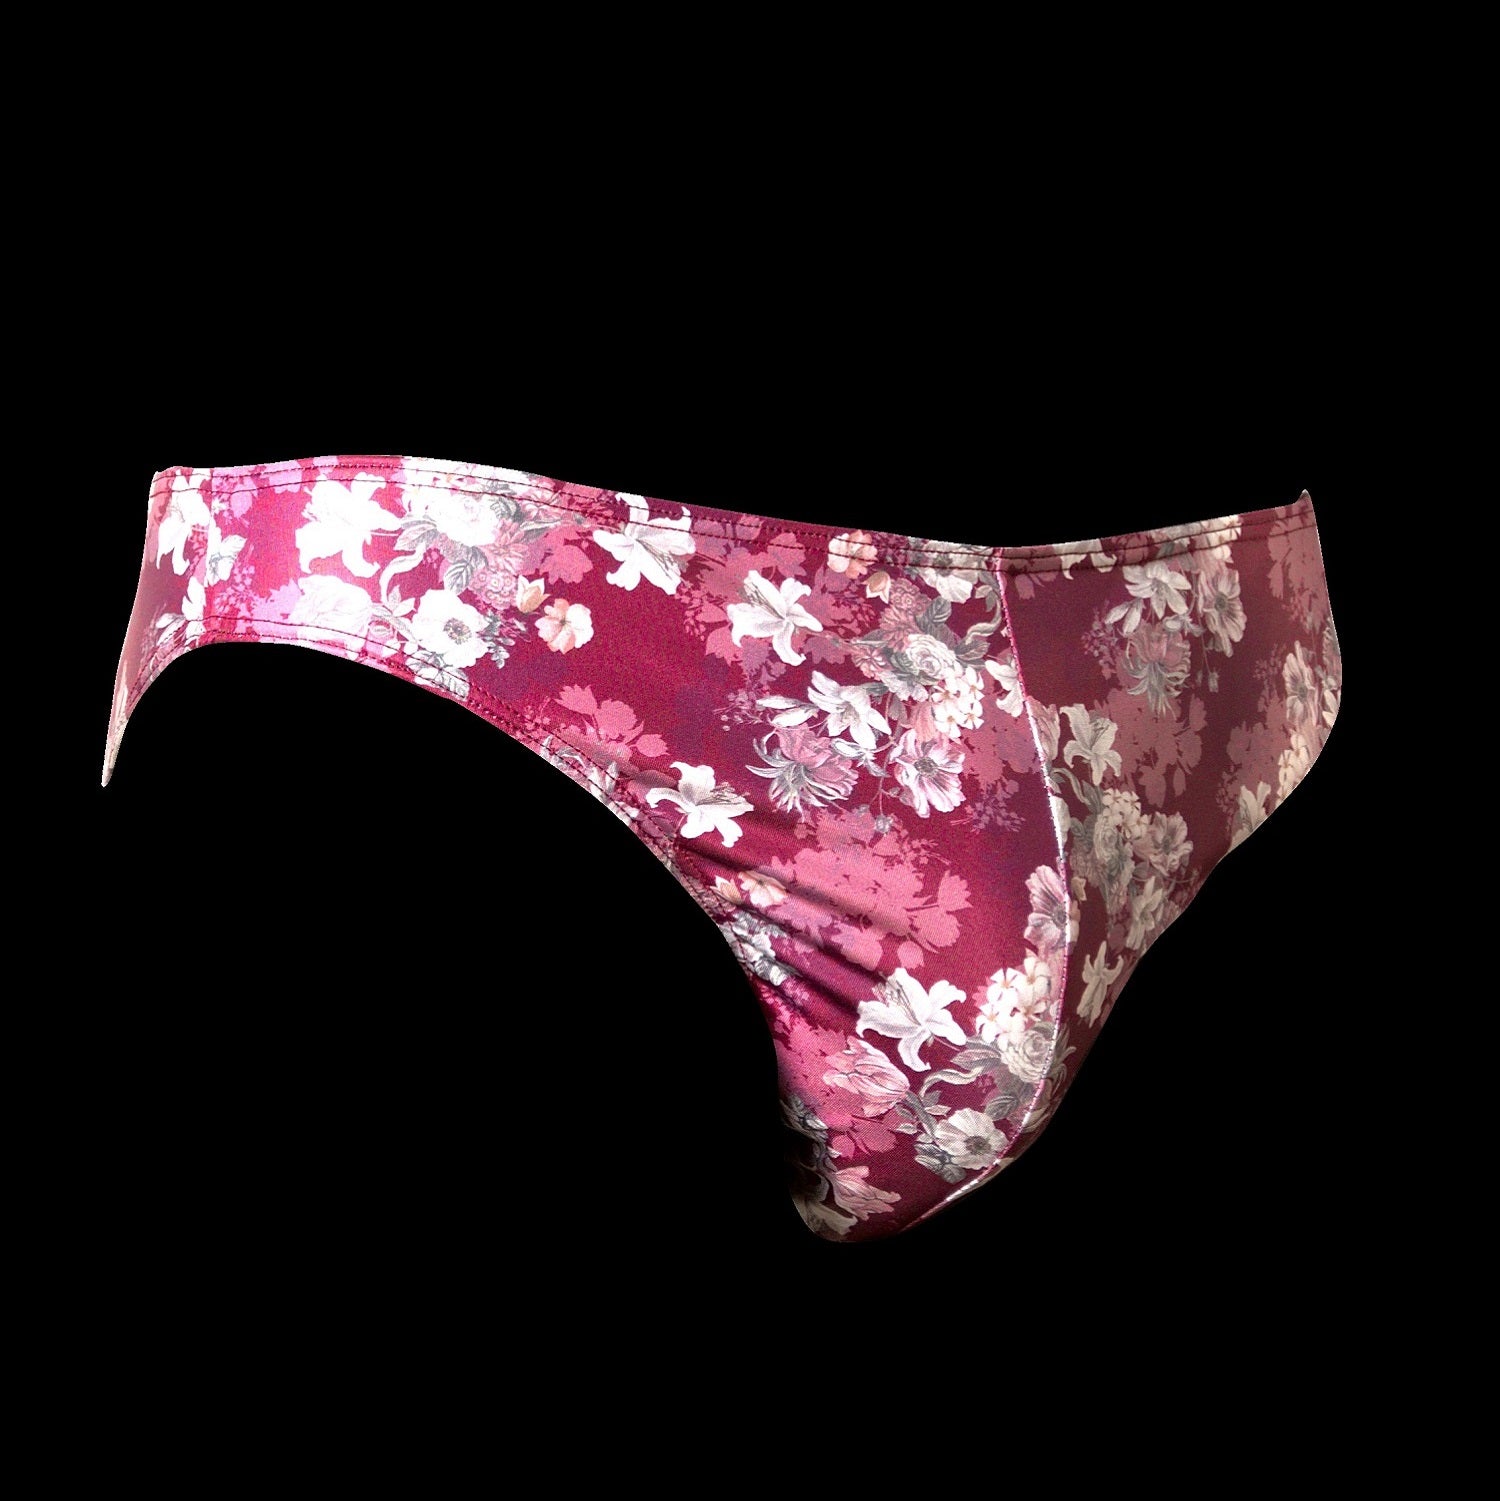 The Etseo Nature Reflex Bikini Brief Bordeaux is part of the Etseo Nature Reflex men's underwear collection of Trunks and Bikini Briefs. Etseo Nature Reflex is made with a very comfortable shiny and elastic fabric printed with modern floral patterns. At Etseo we manufacture quality men's underwear.